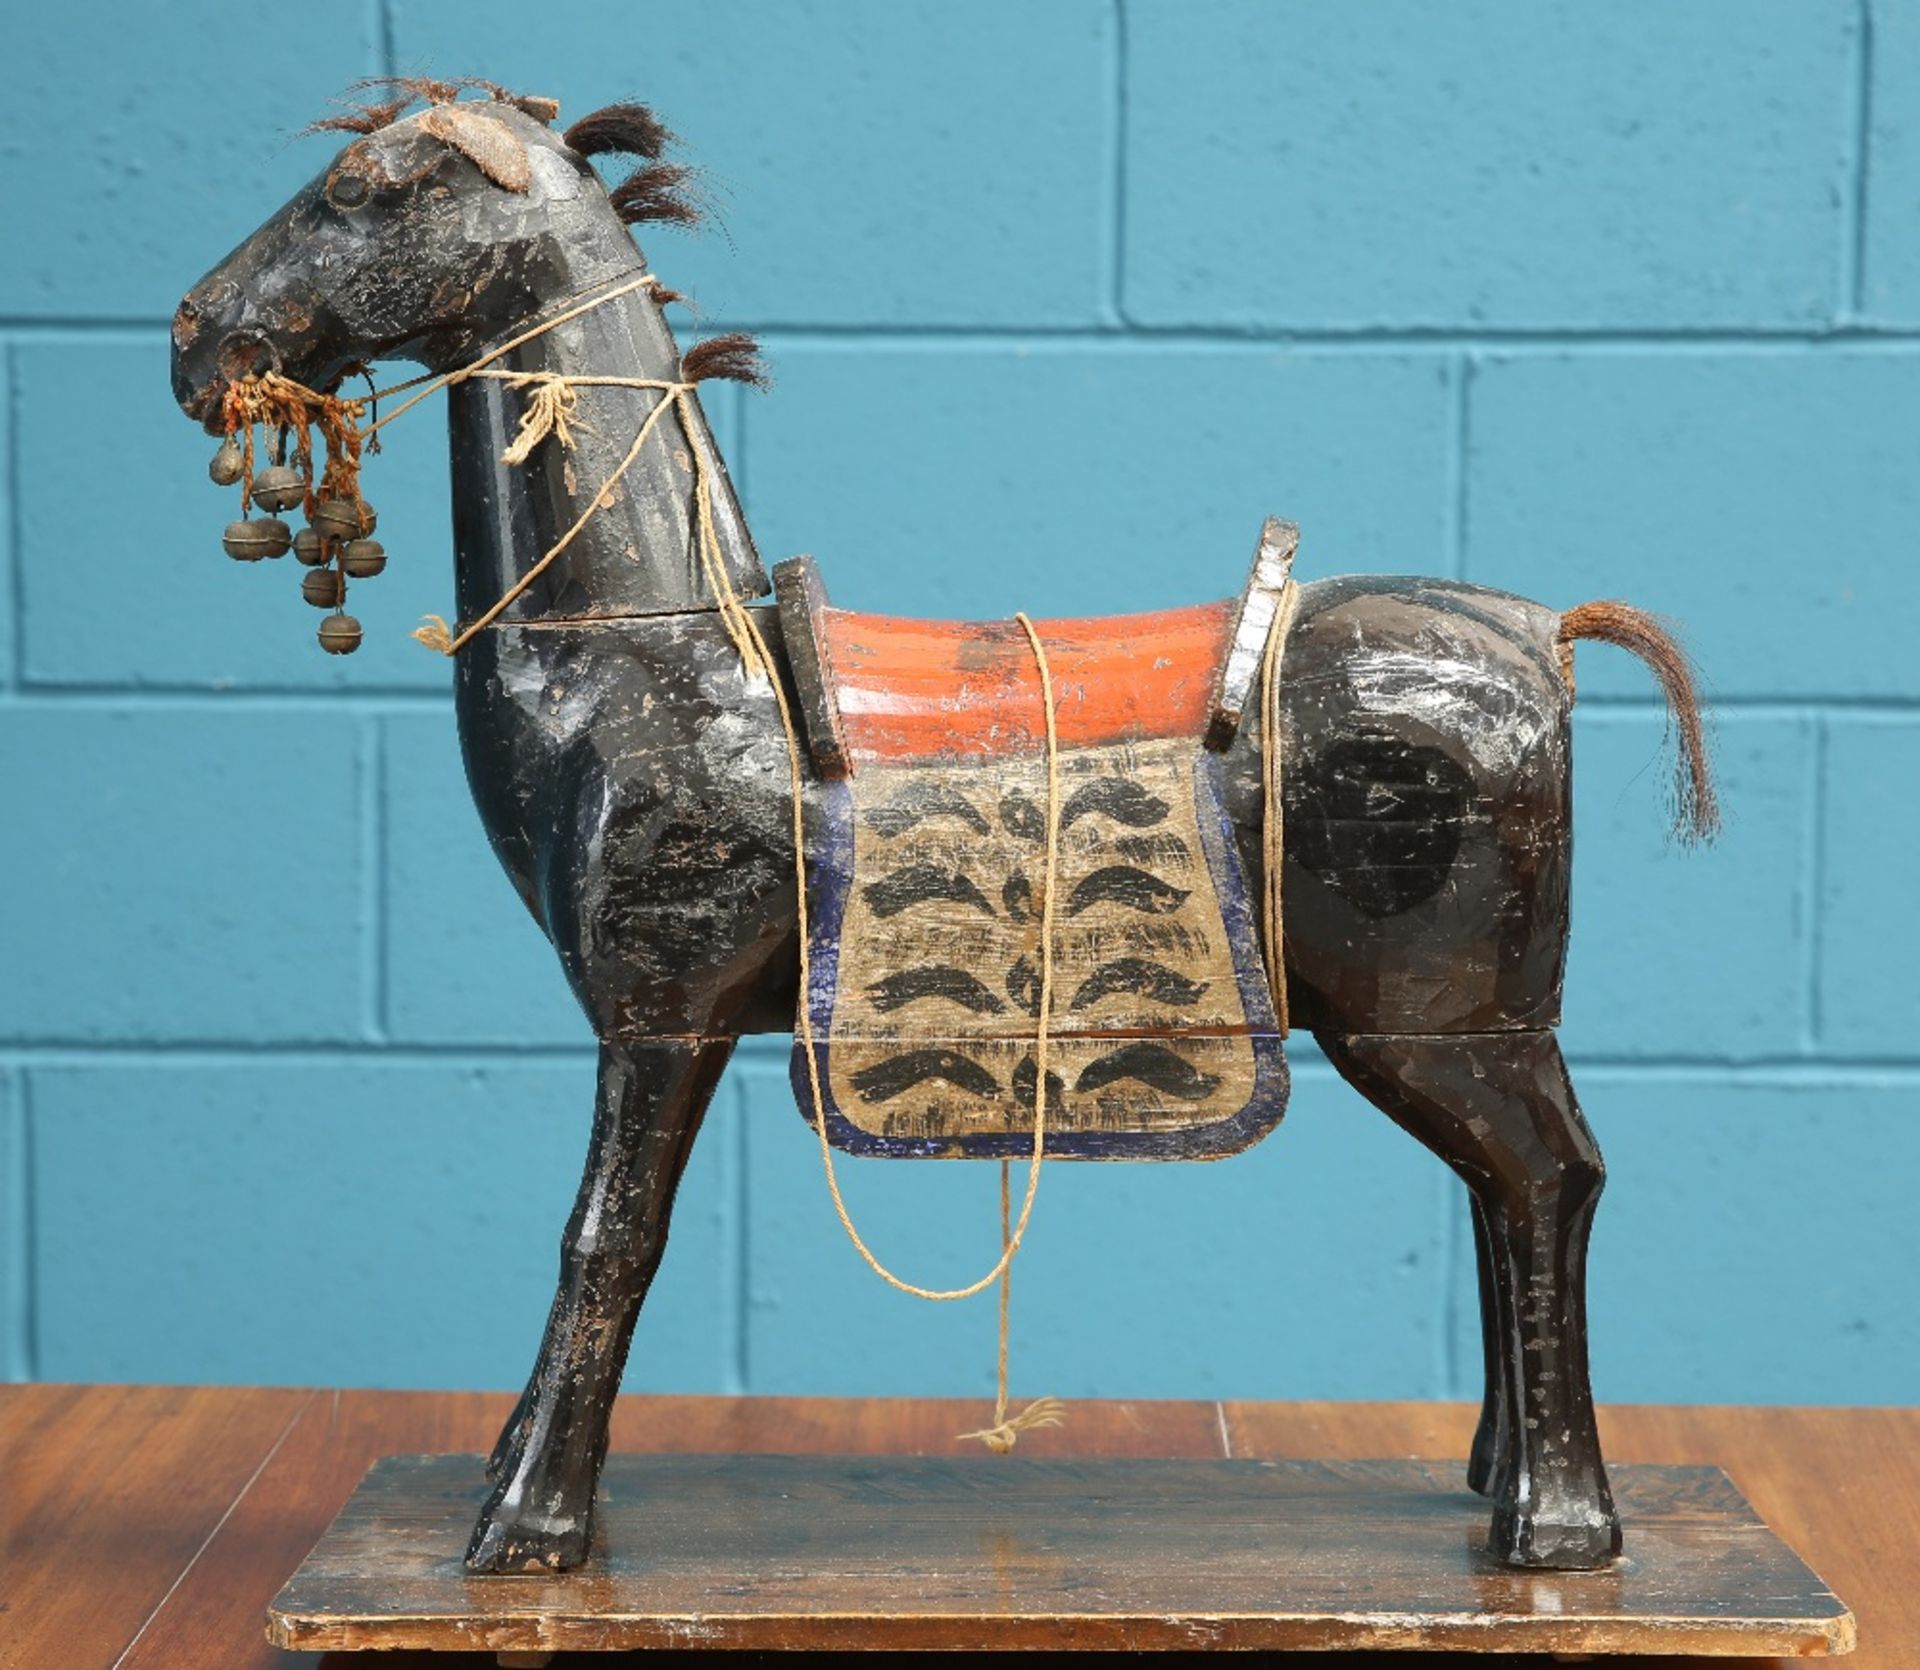 A 19TH CENTURY MIDDLE EASTEN CARVED AND PAINTED MODEL OF A HORSE